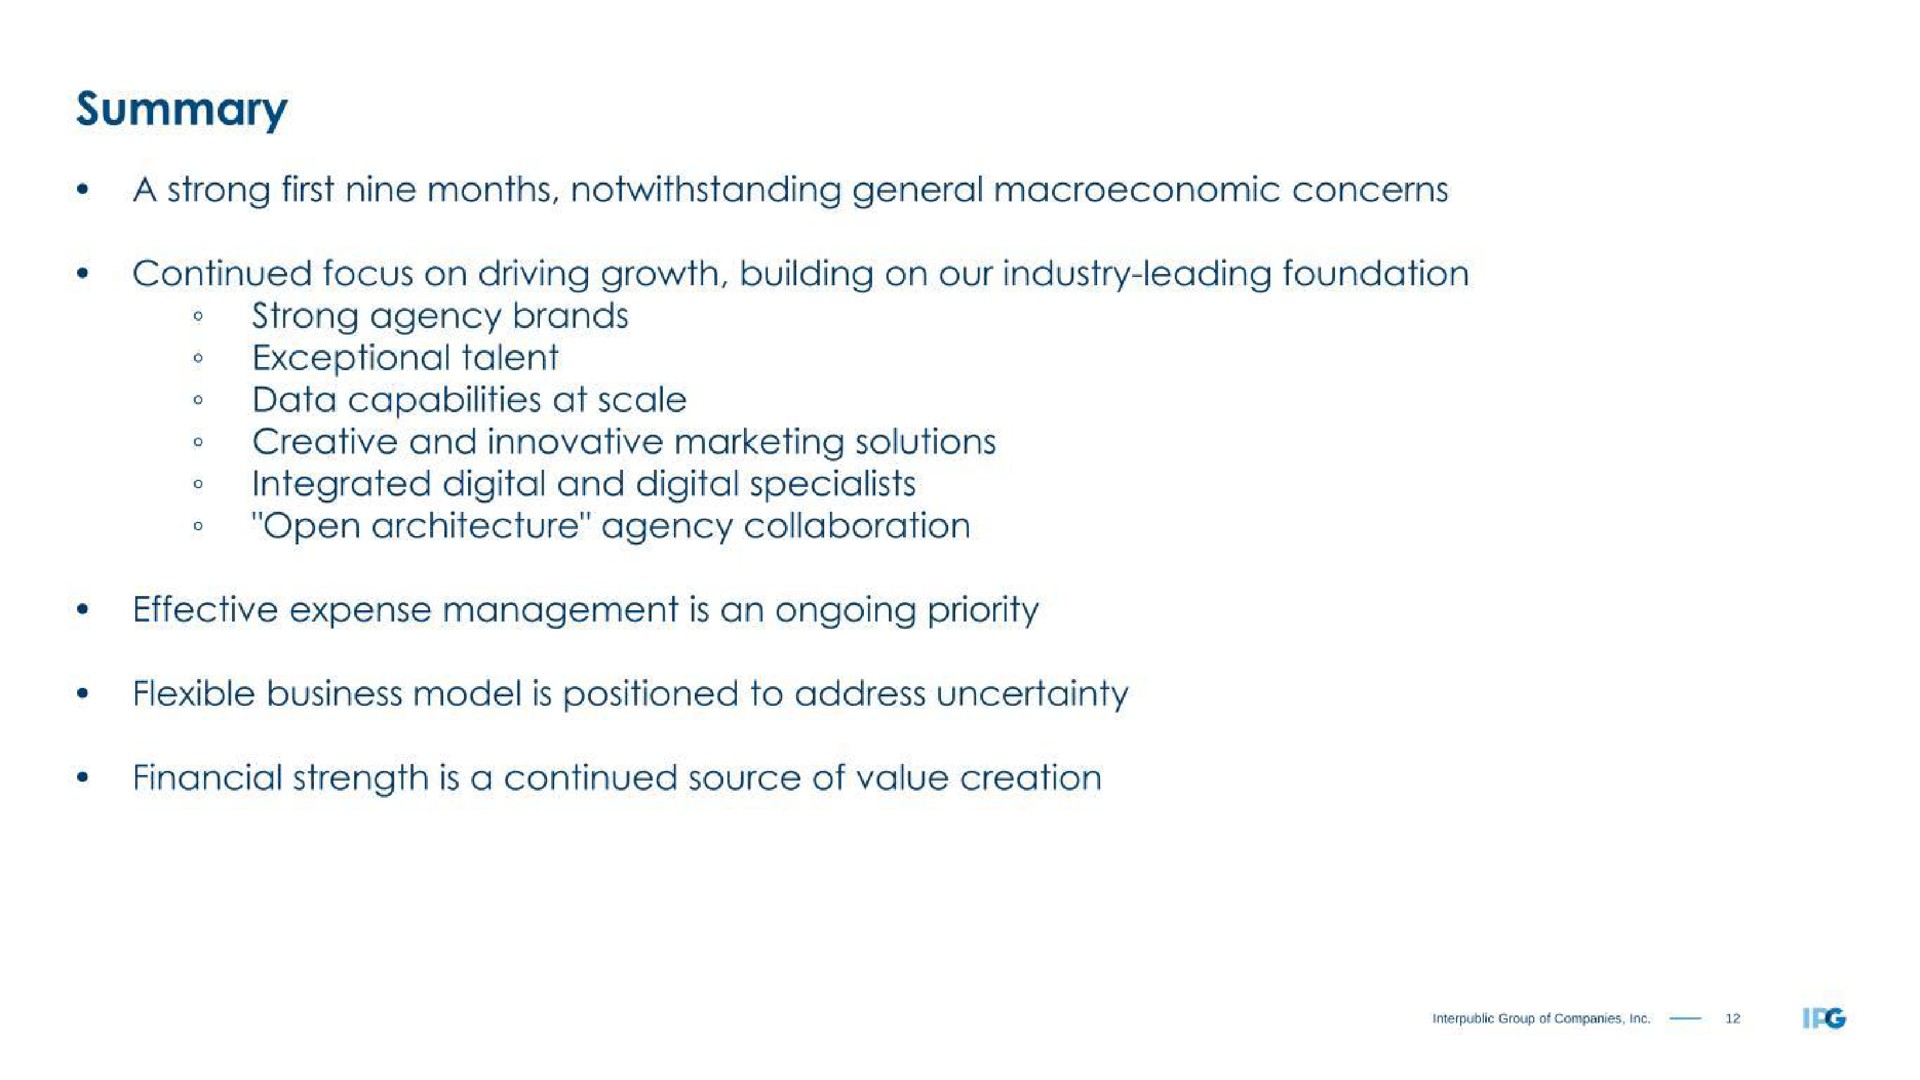 summary first months notwithstanding general concerns continued focus on driving growth building on our industry leading foundation agency brands exceptional talent data capabilities at scale creative and innovative marketing solutions integrated digital and digital specialists open architecture agency collaboration effective expense management is an ongoing priority flexible business model is positioned to address uncertainty financial strength is a continued source of value creation | Interpublic Group of Companies